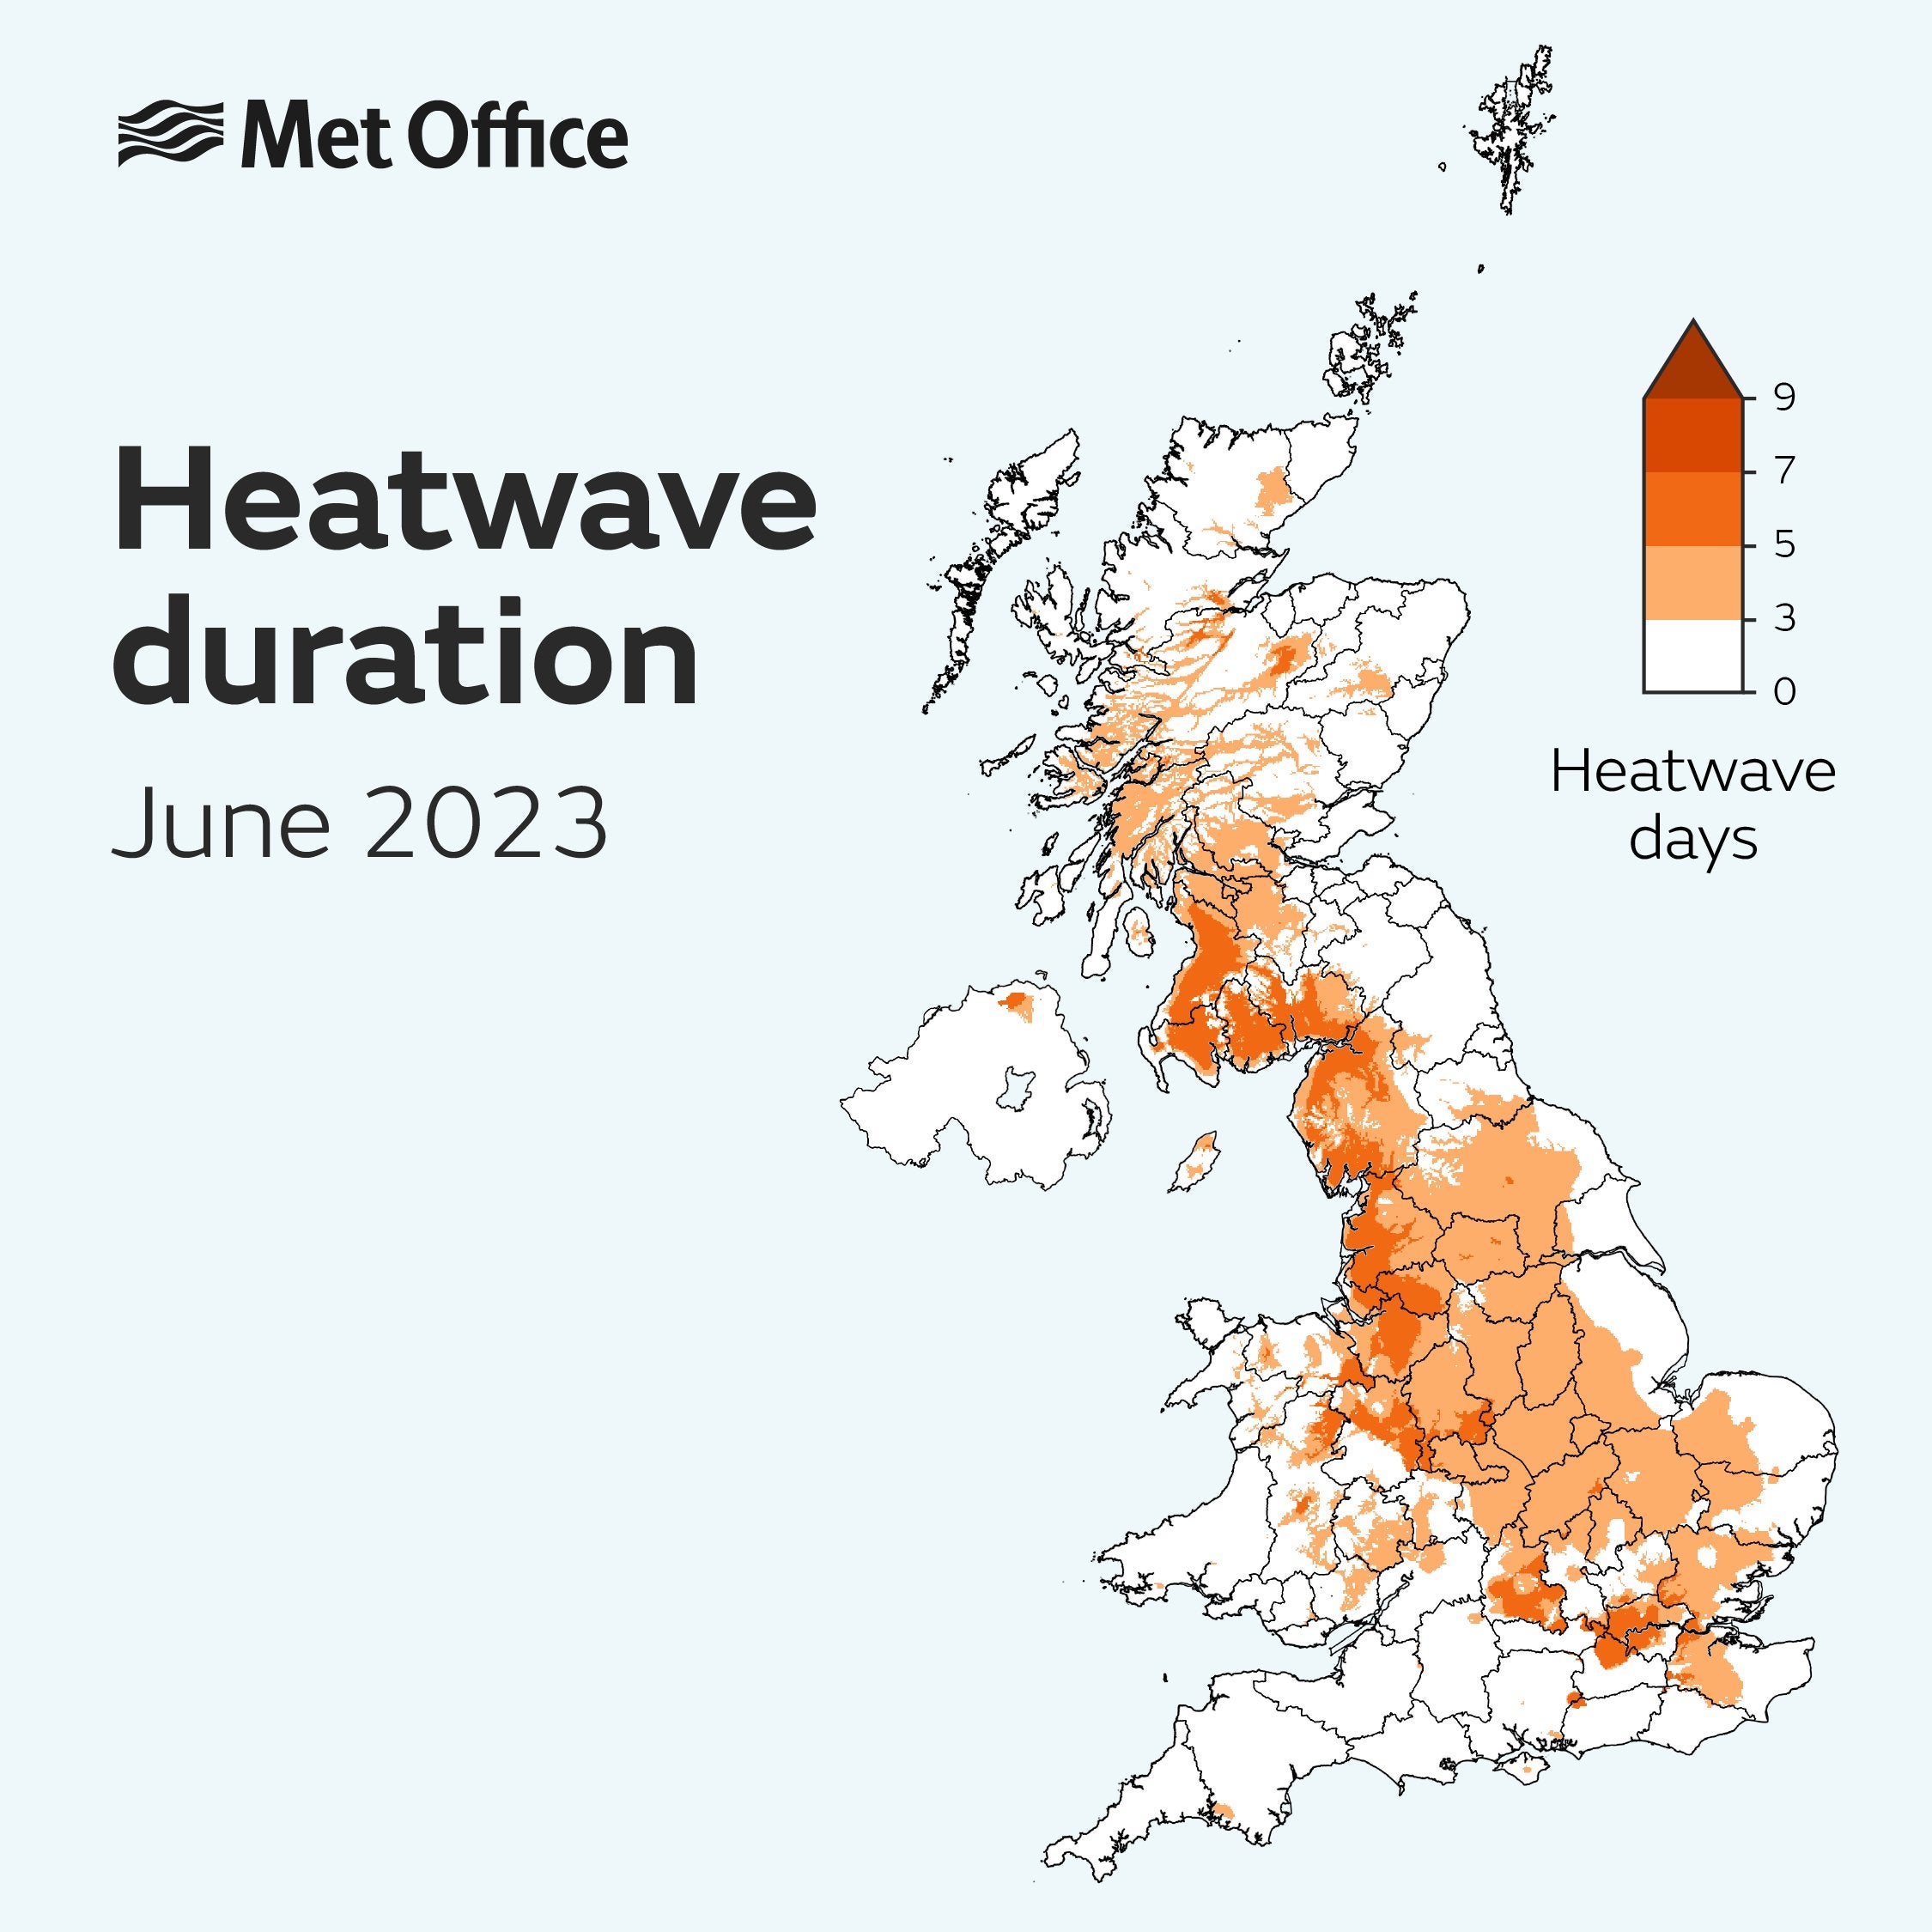 Areas of the UK in a heatwave based on temperatures leading up to and including 14 June